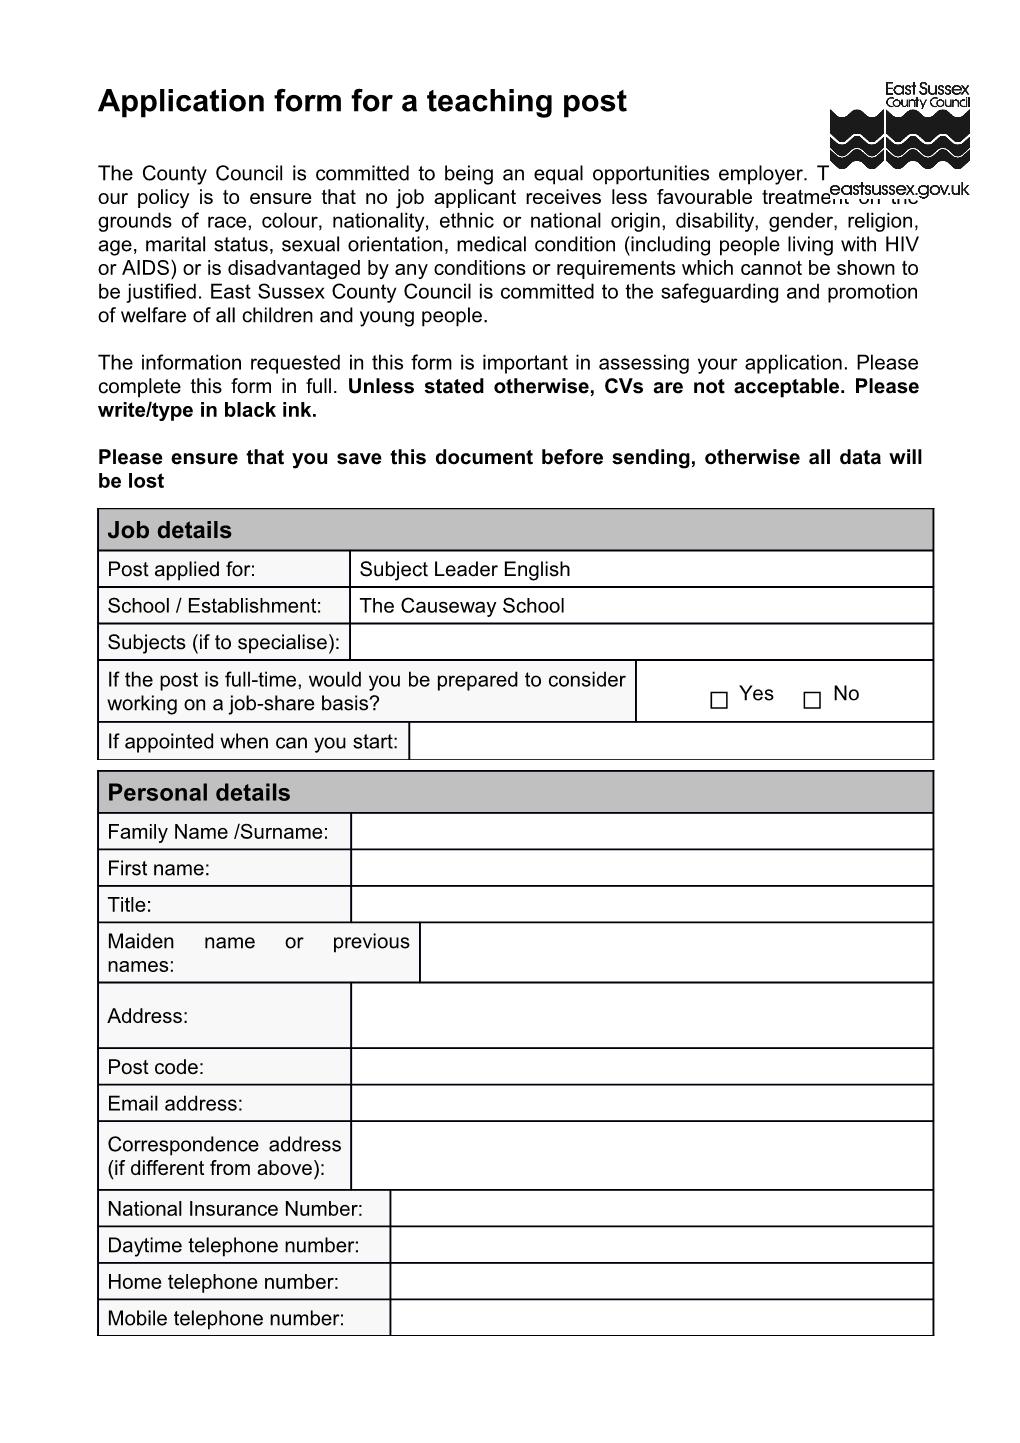 Application Form for a Teaching Post s2